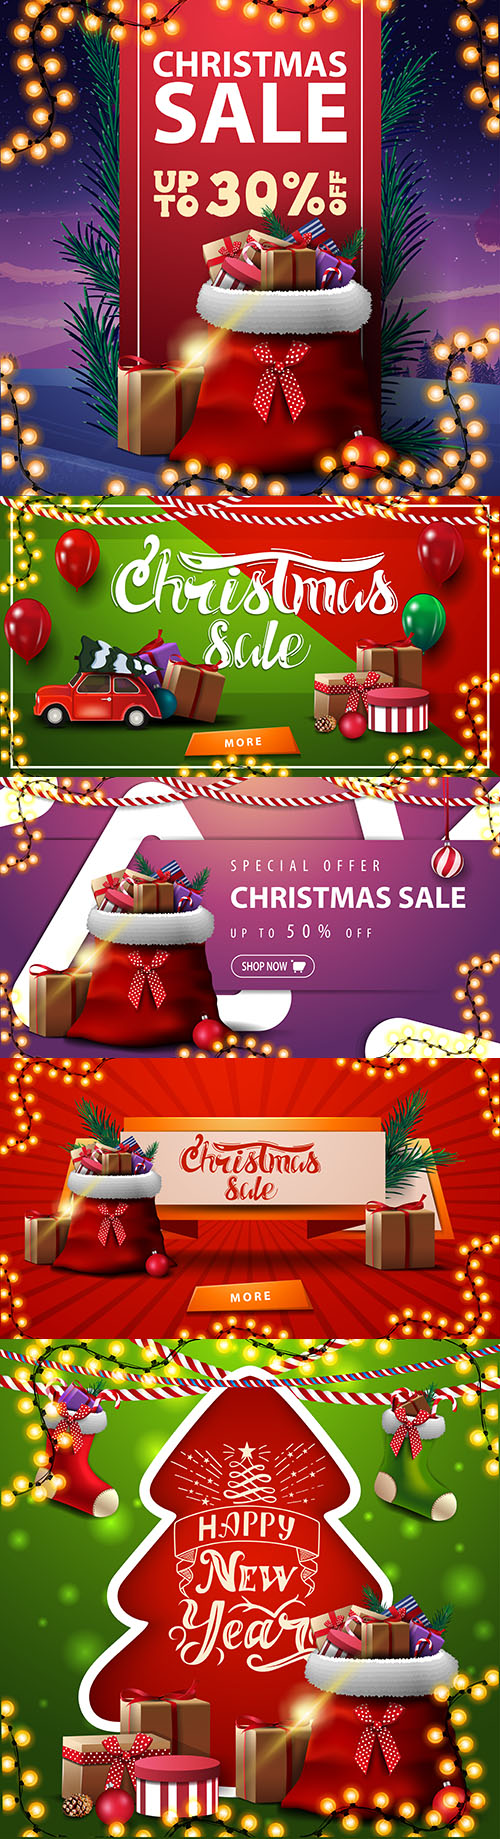 Christmas banner with red ribbon and garland discounted
